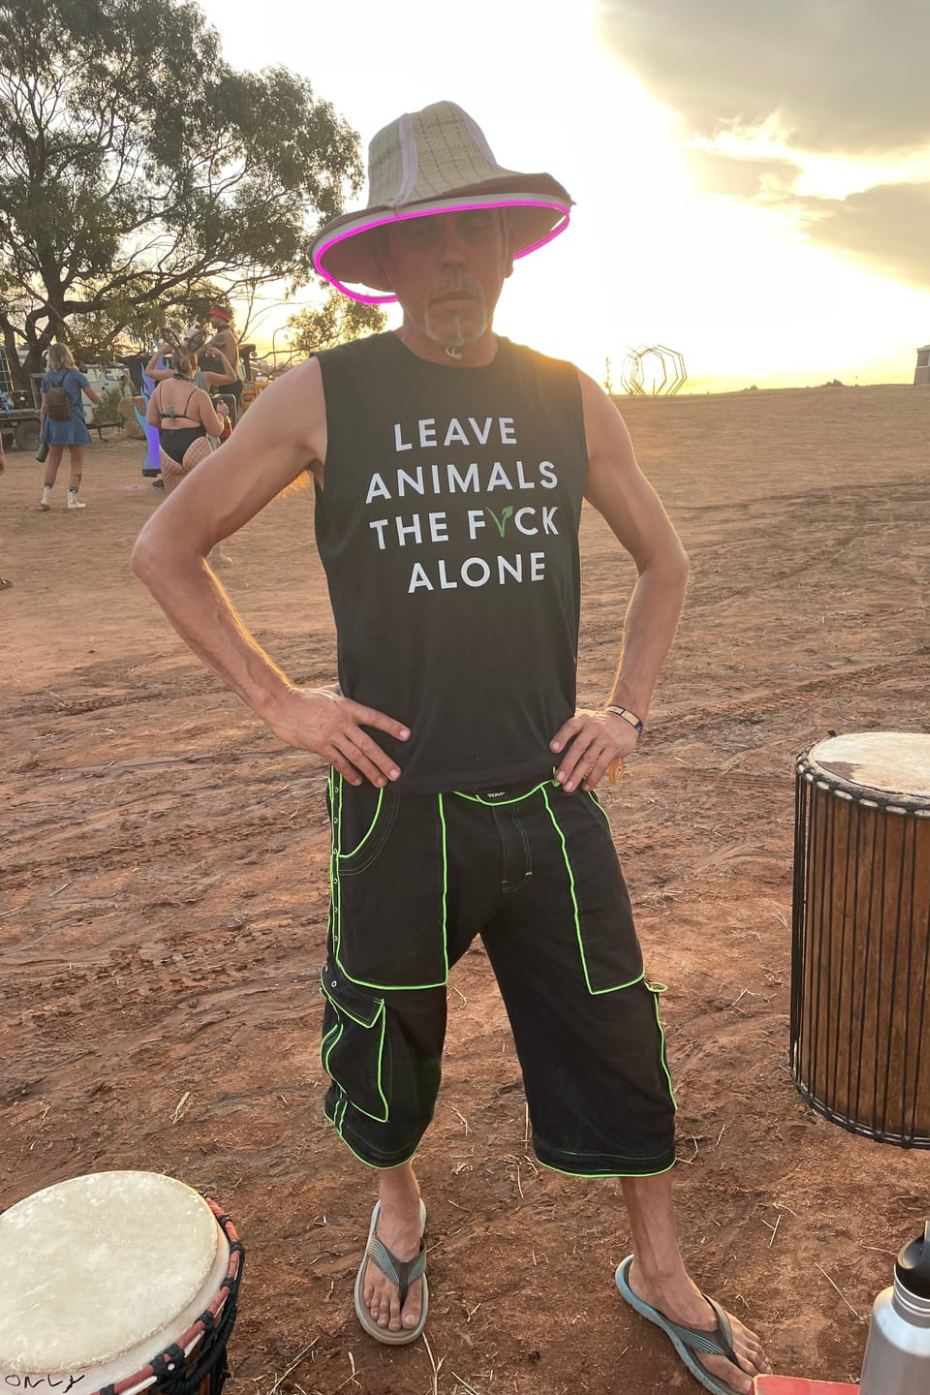 Leave Animals Alone Muscle Shirt